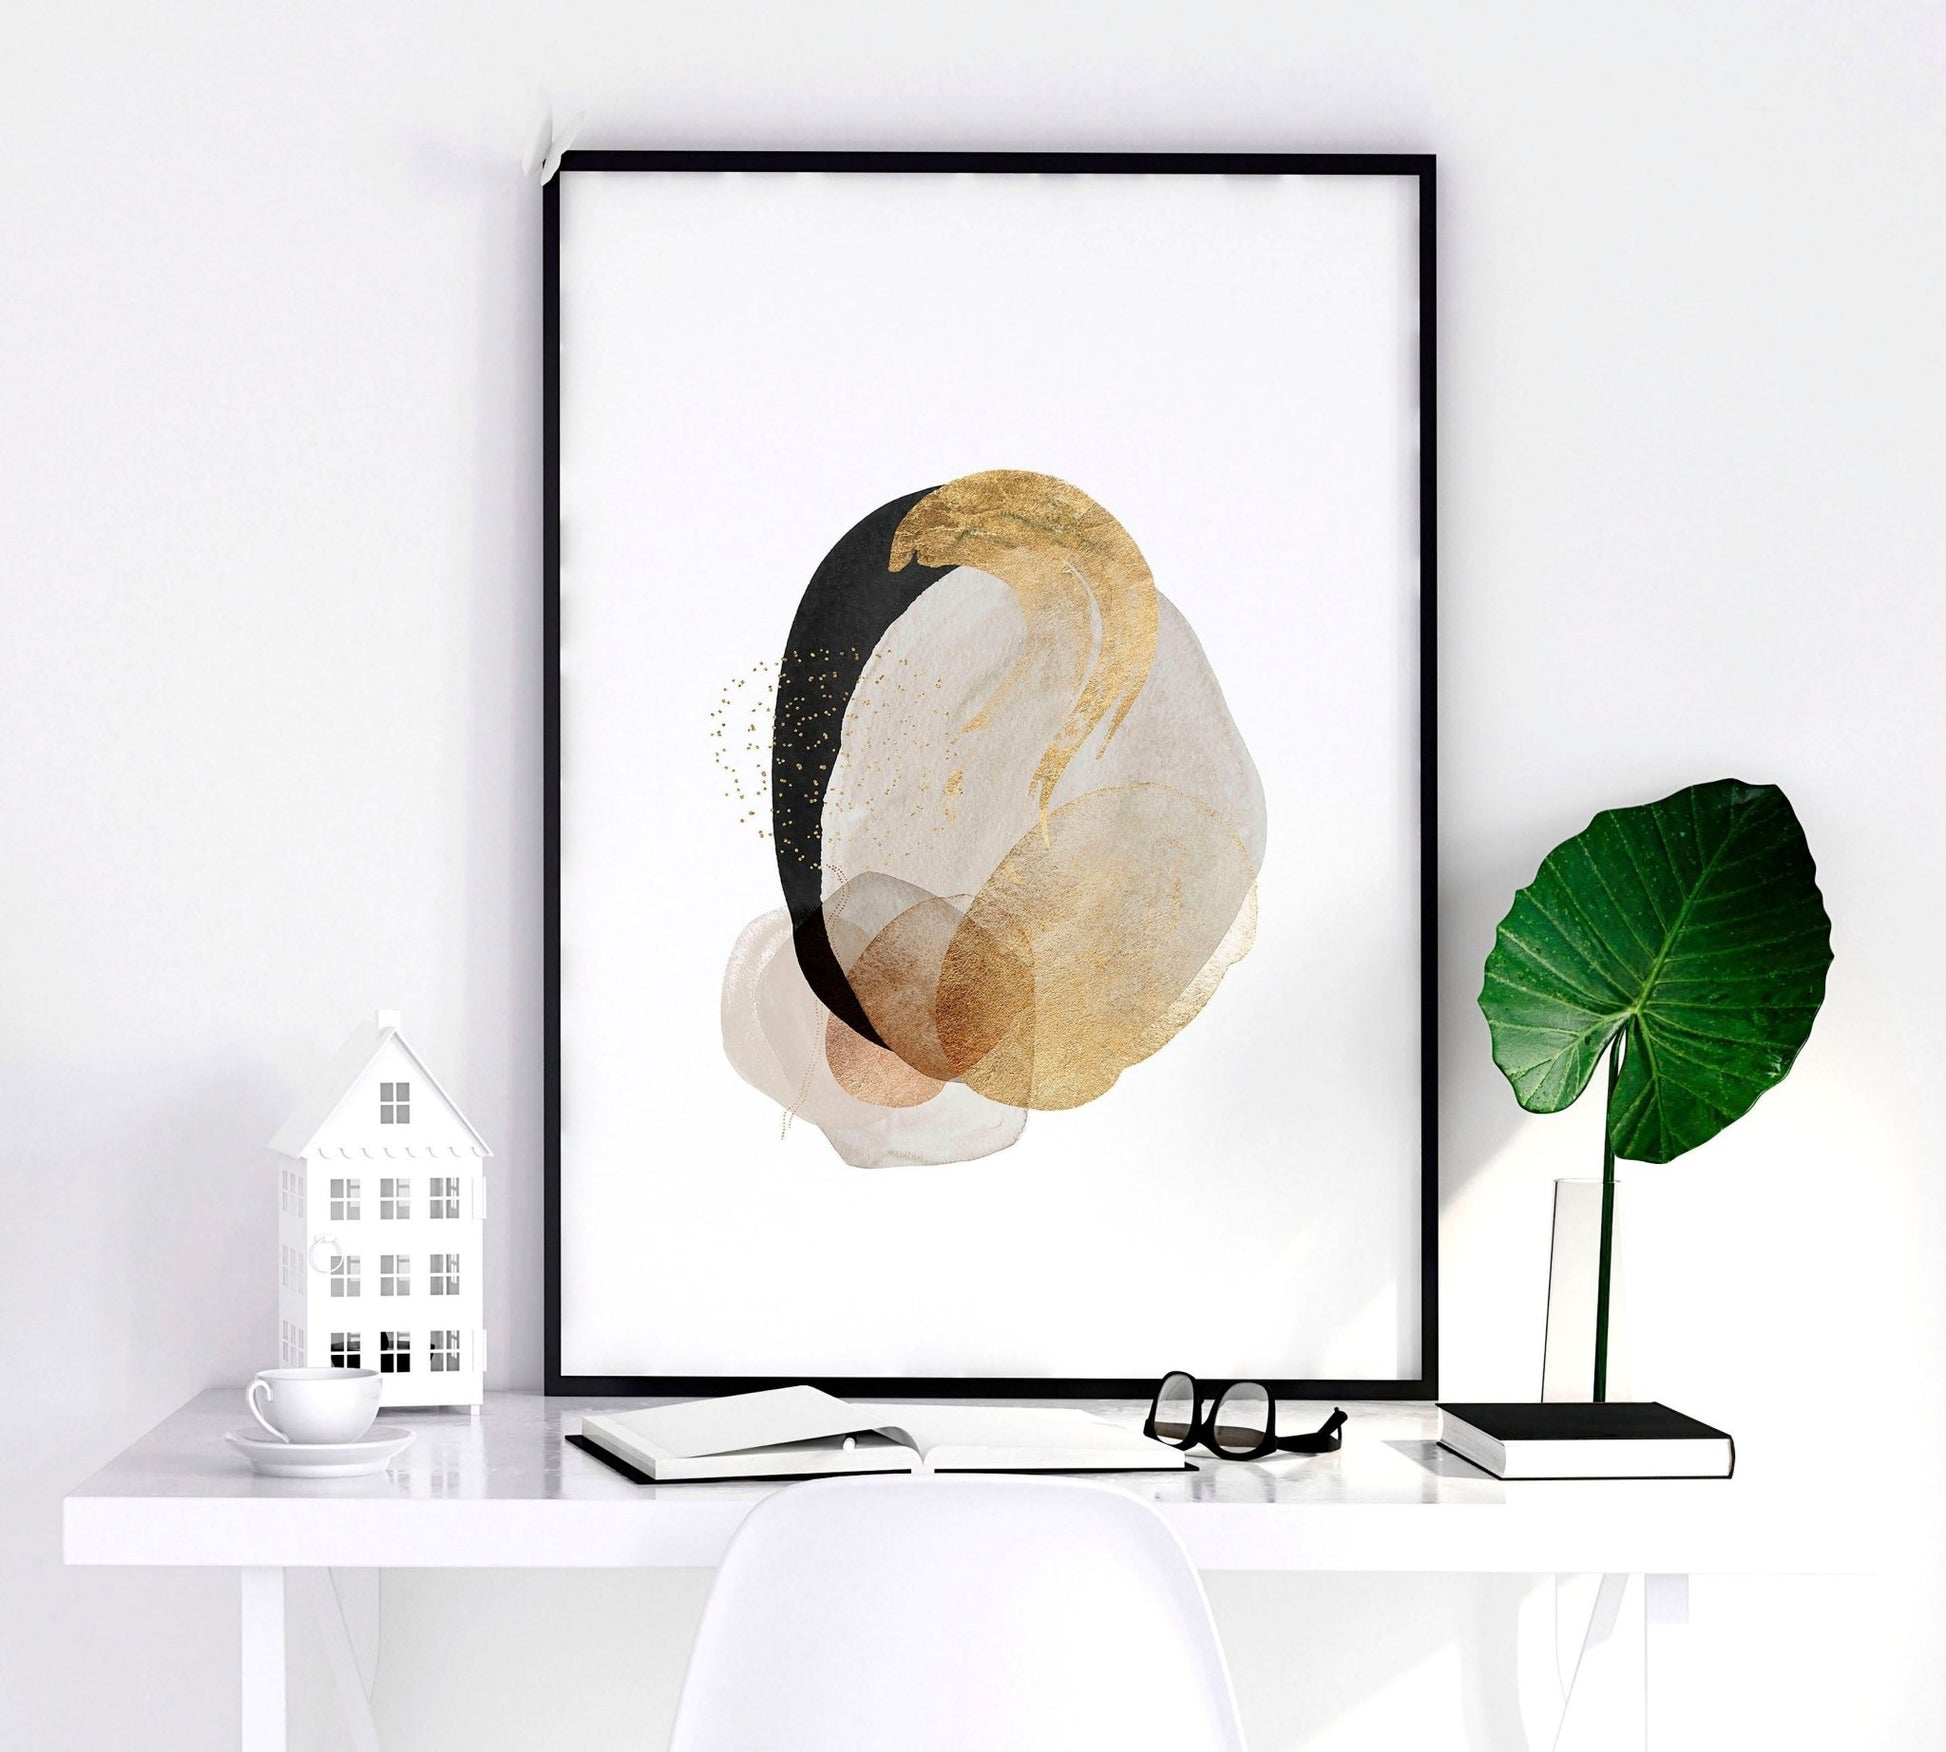 Abstract wall art posters | set of 3 wall art prints - About Wall Art